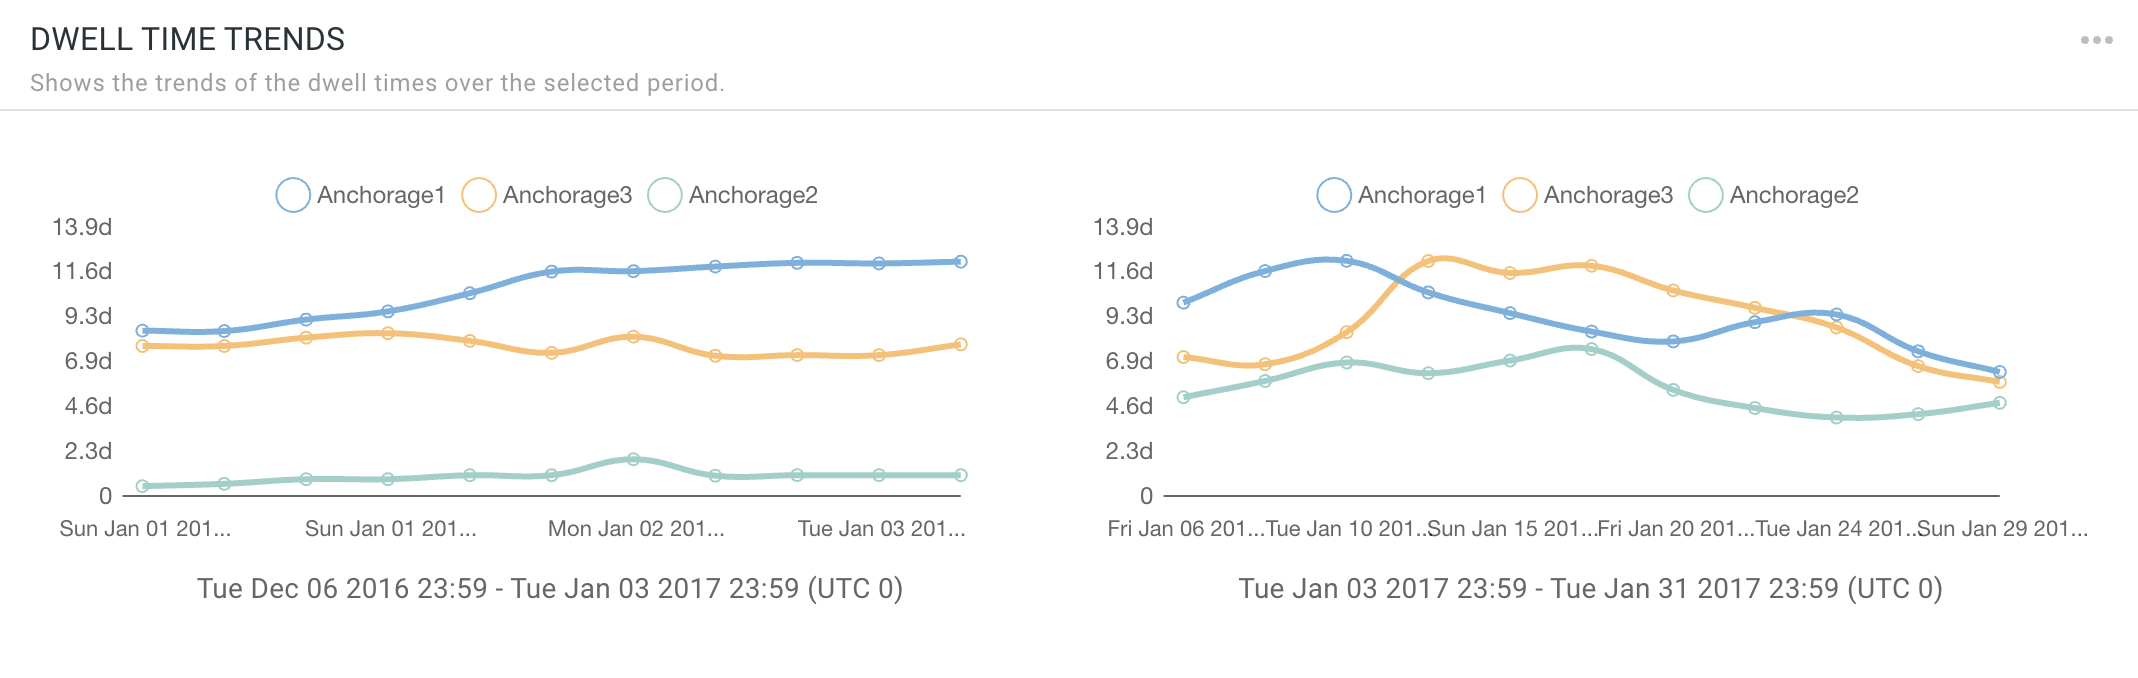 screenshot of trend lines of average dwell times for 3 different areas